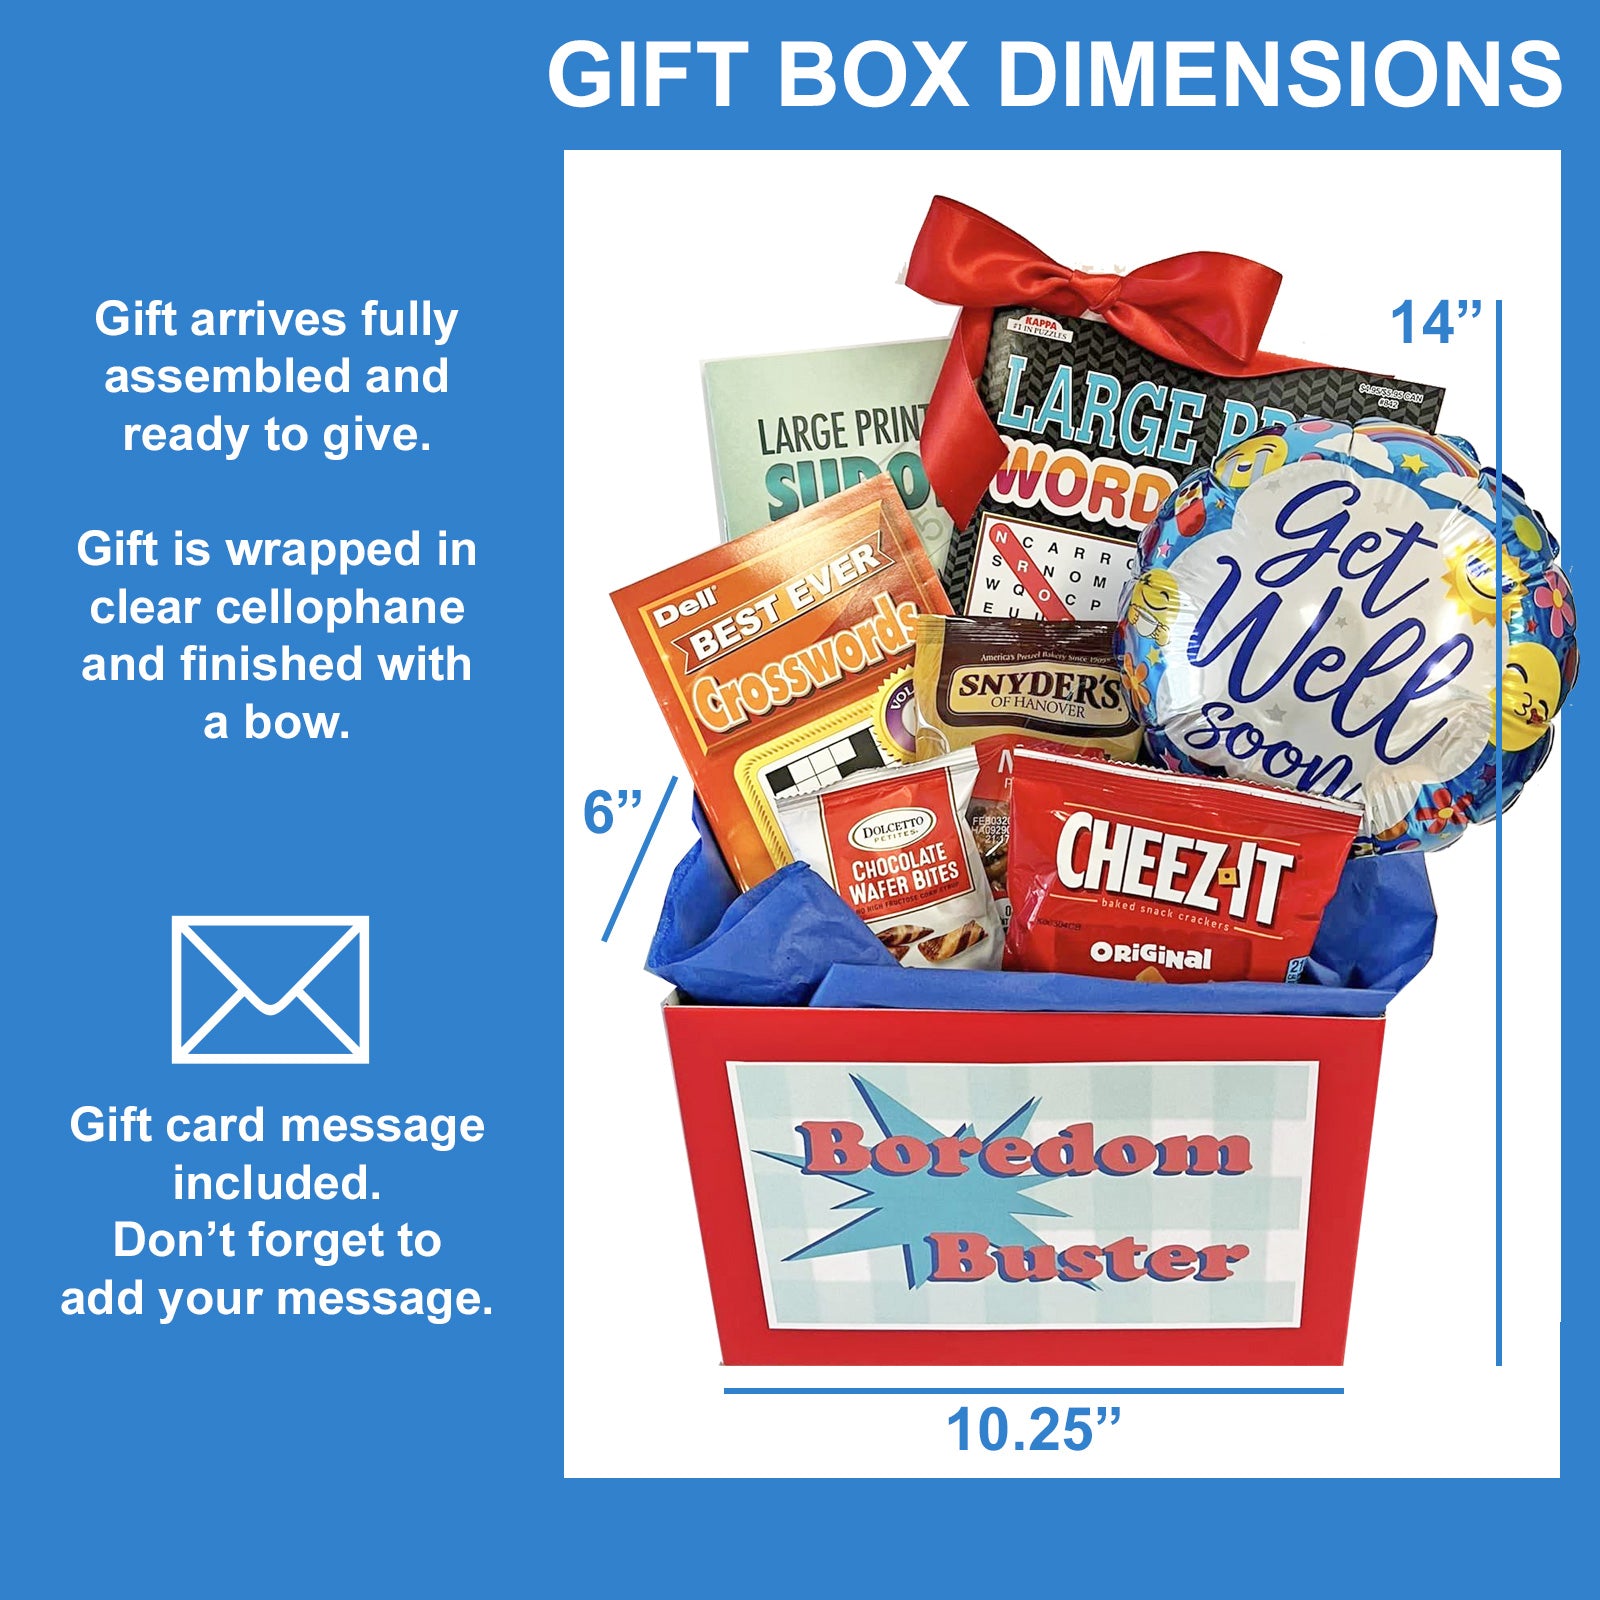 Boredom Buster Get Well Gift Box Enjoyable Get-Well Gift for Men, Women, Friends and Family with Snacks, Puzzle Books and Balloon